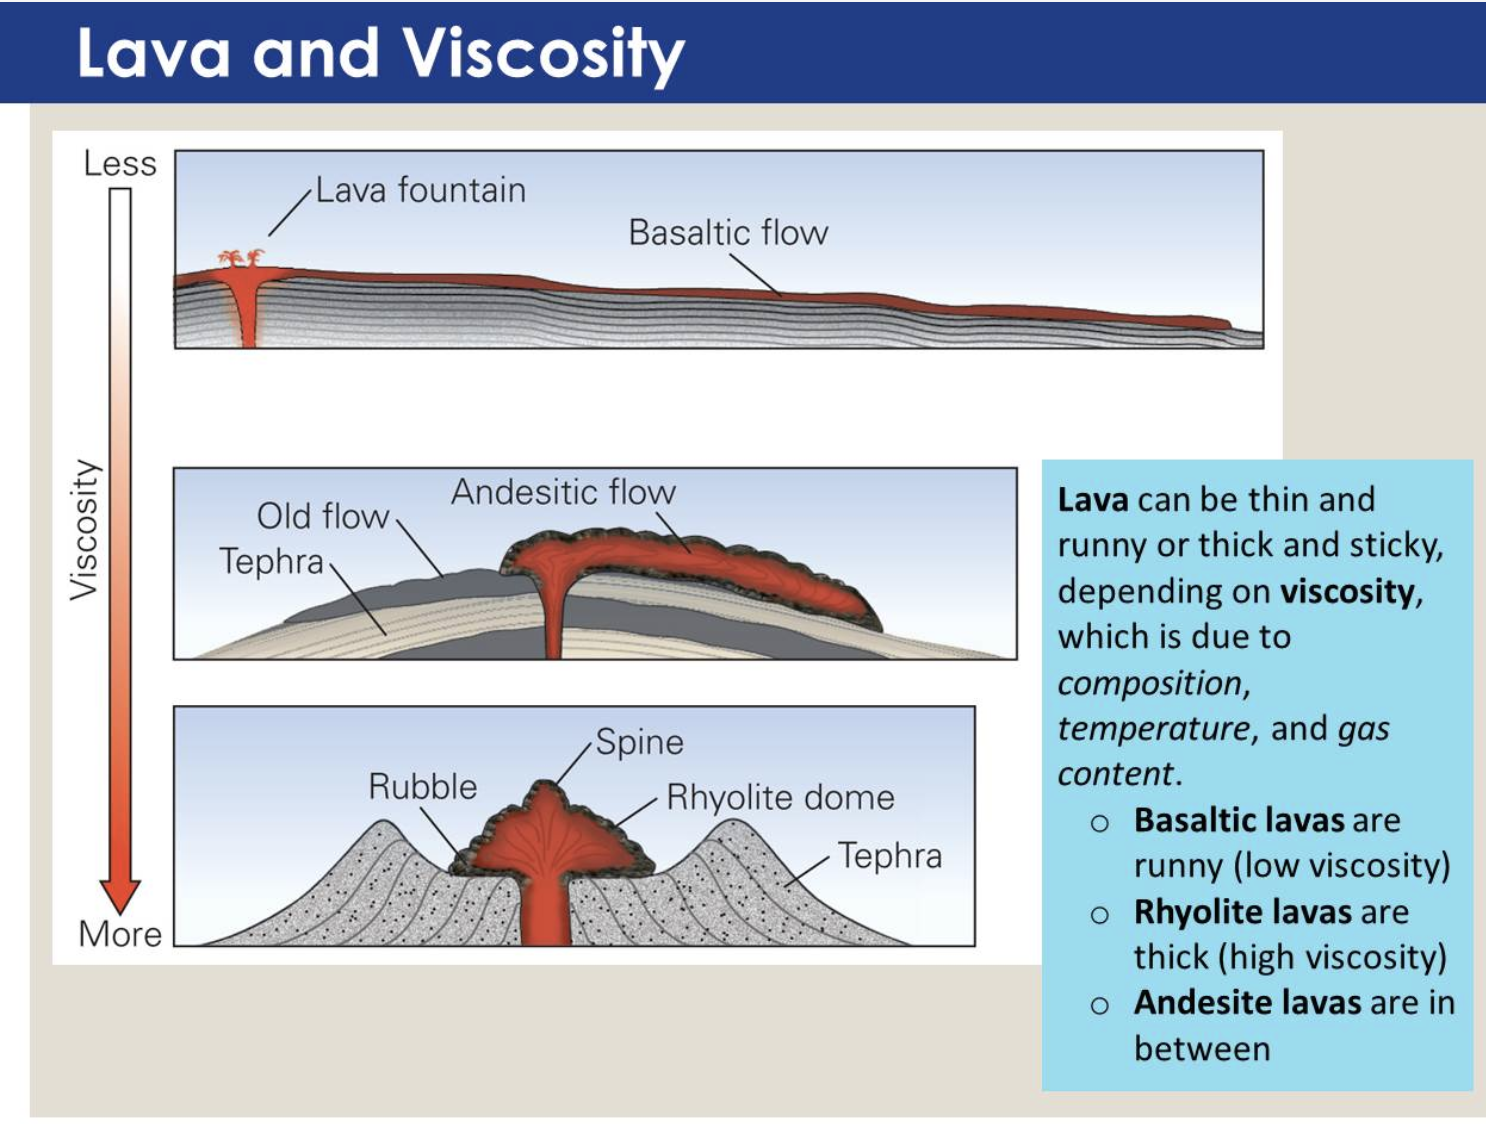 Lava and Viscosity.png